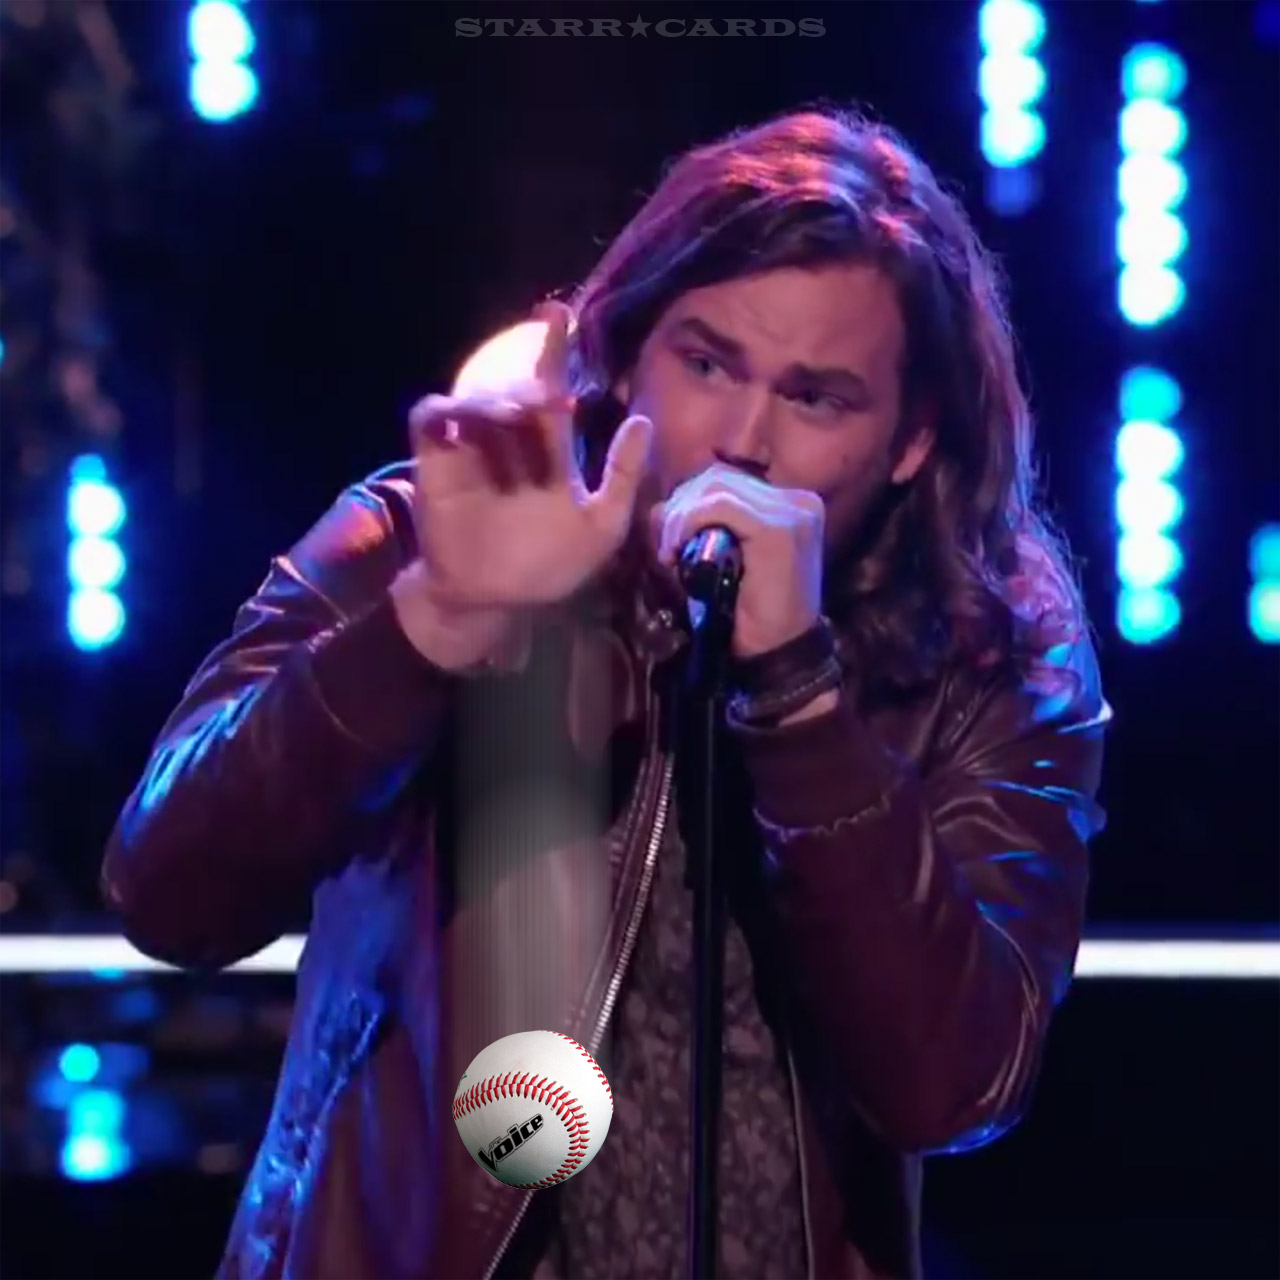 Former baseball star Blaine Mitchell gets snapped up by Team Adam on 'The Voice'